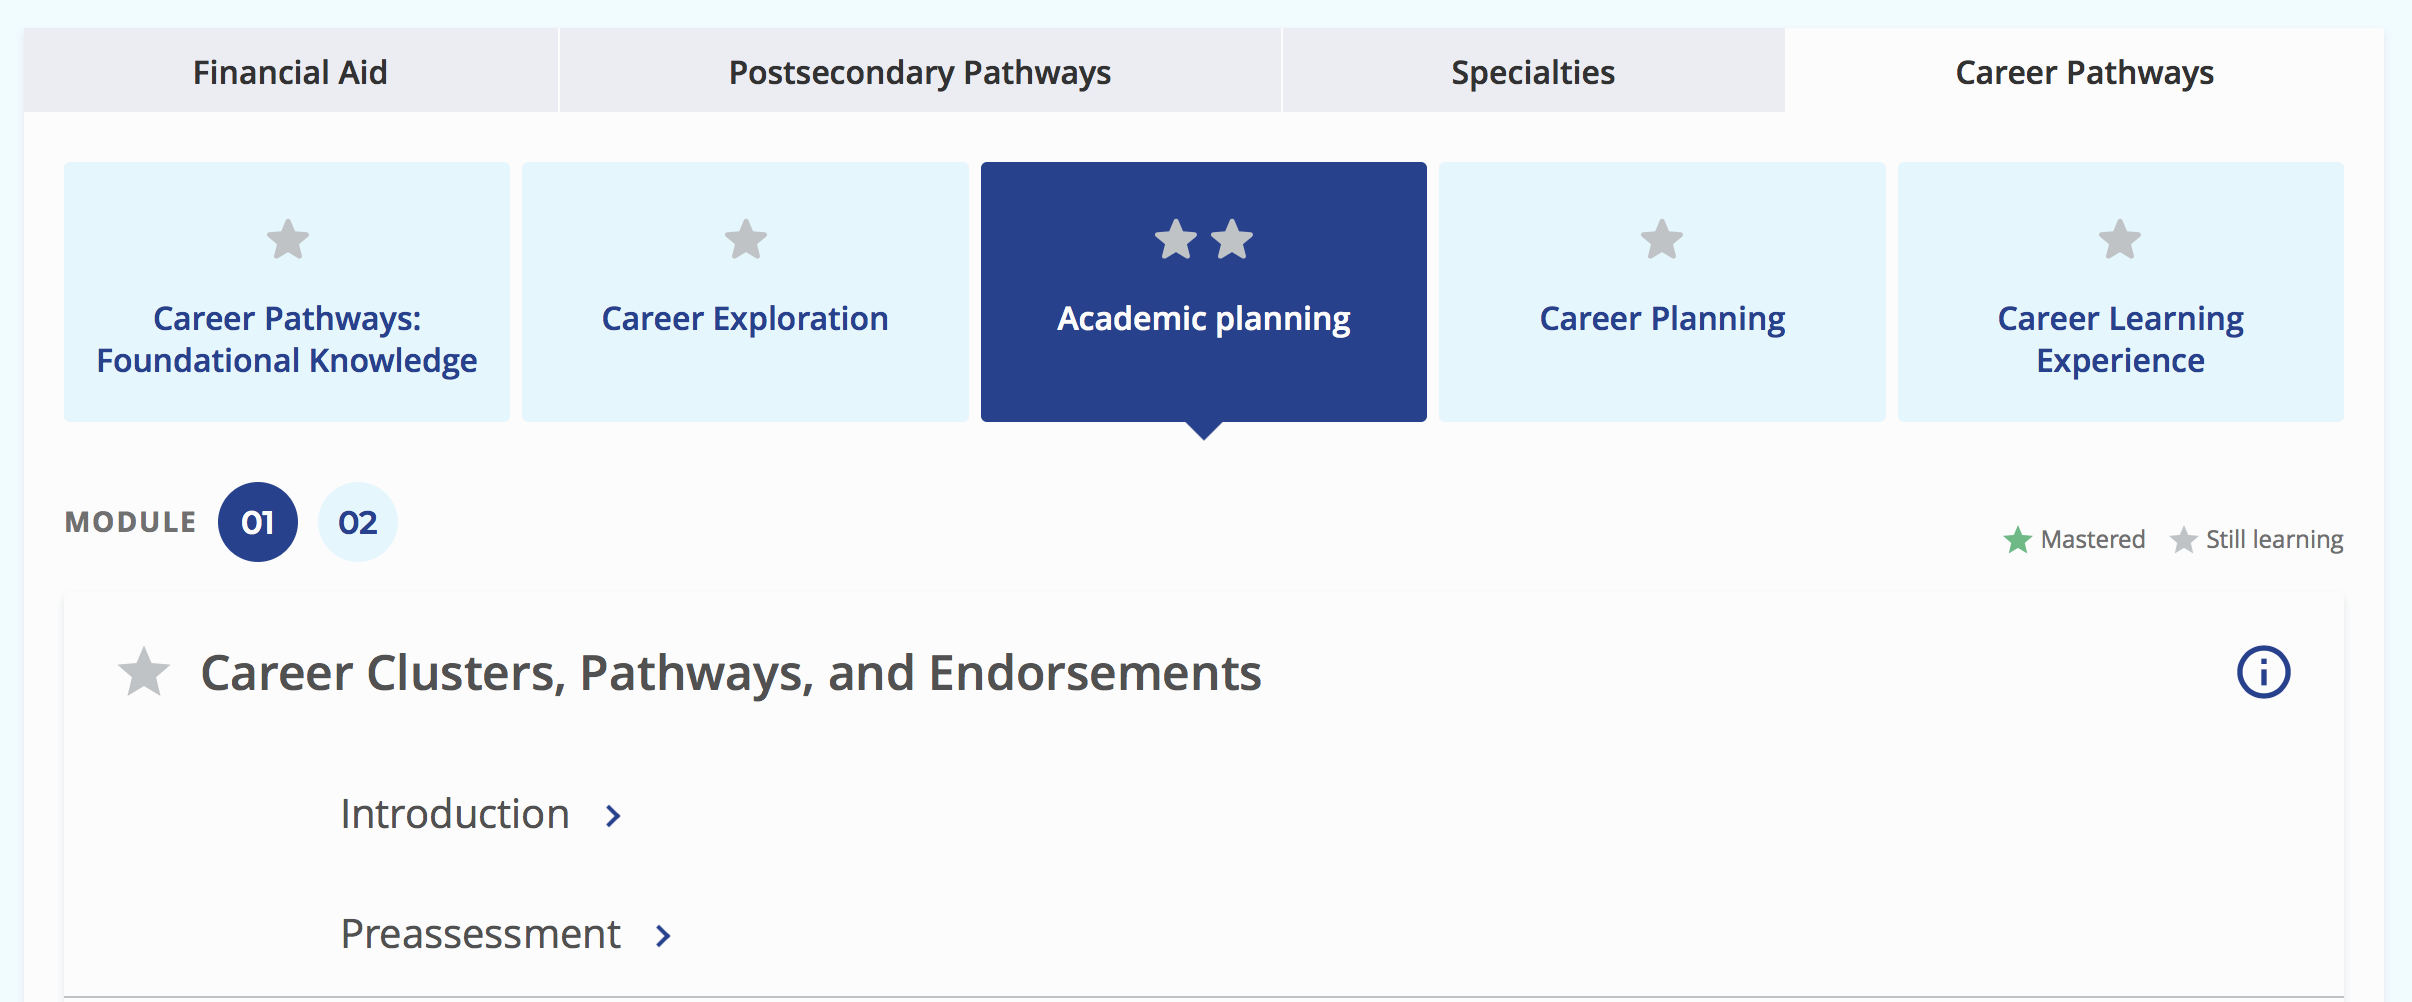 Career Clusters, Pathways, and Endorsements